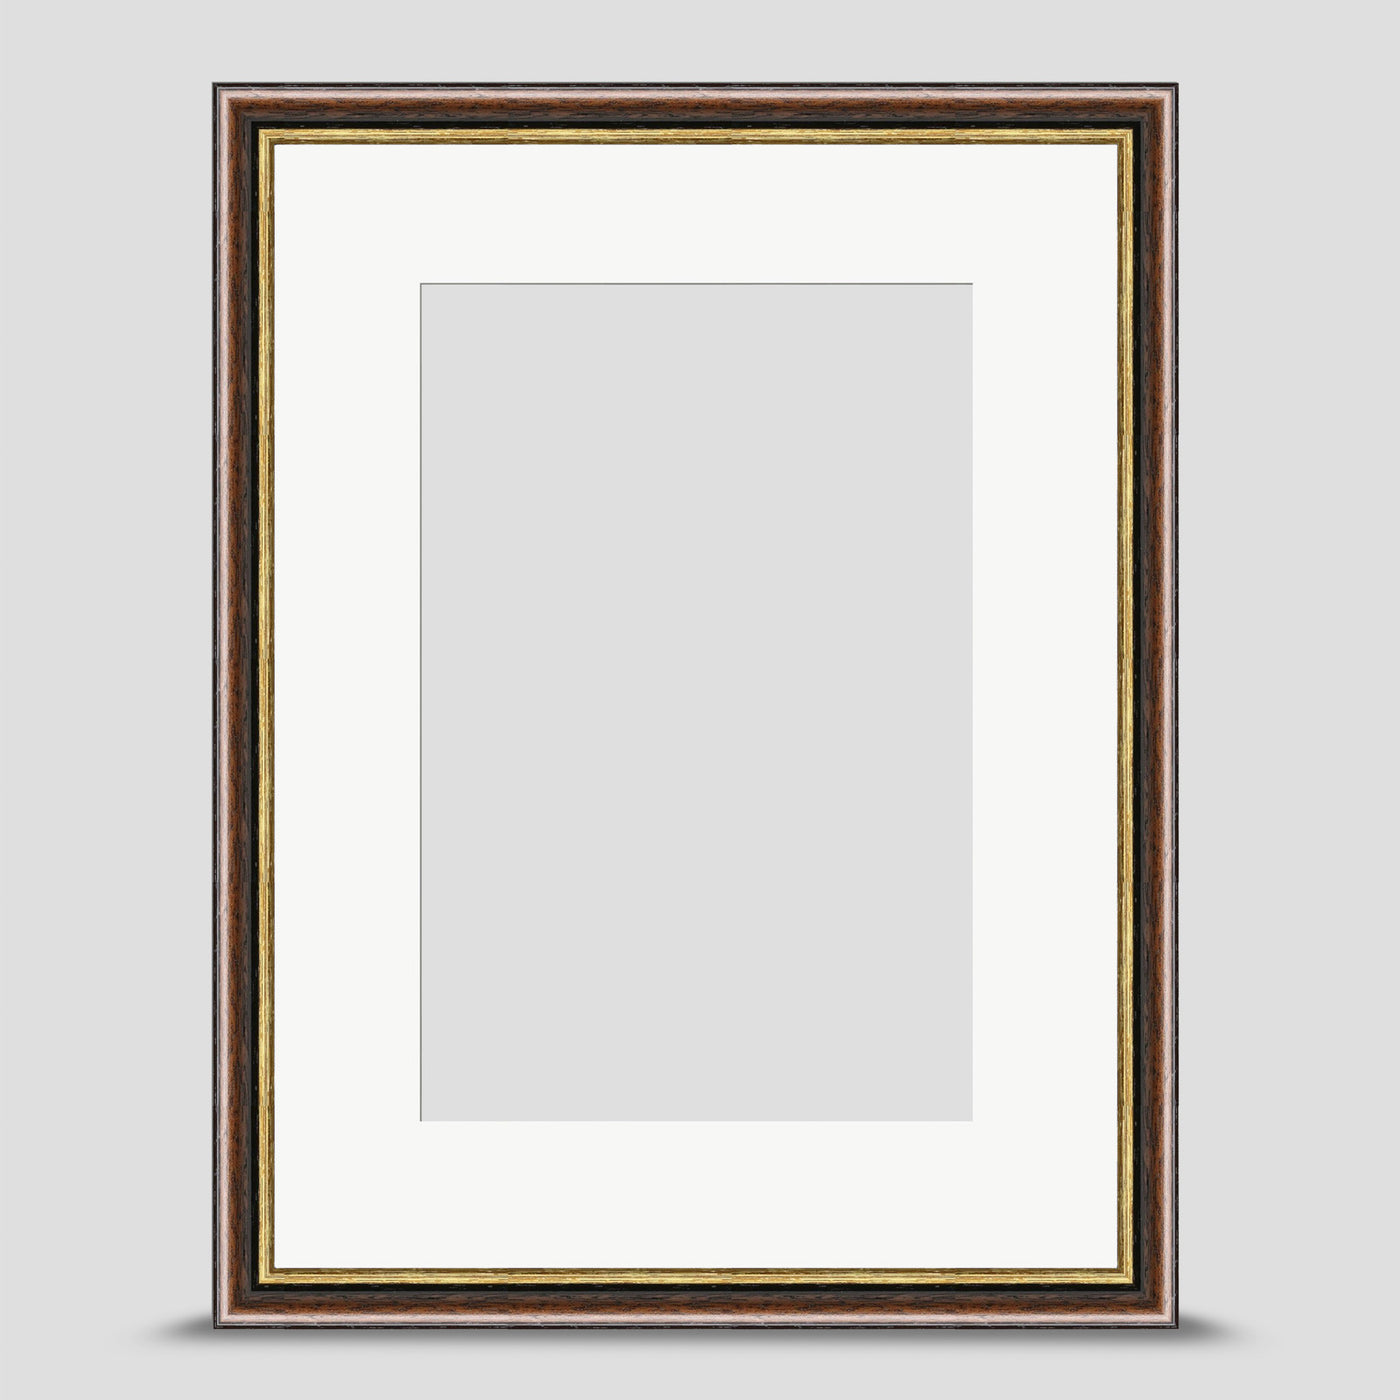 16x12 Brown & Gold Picture Frame with a 12x8 Mount